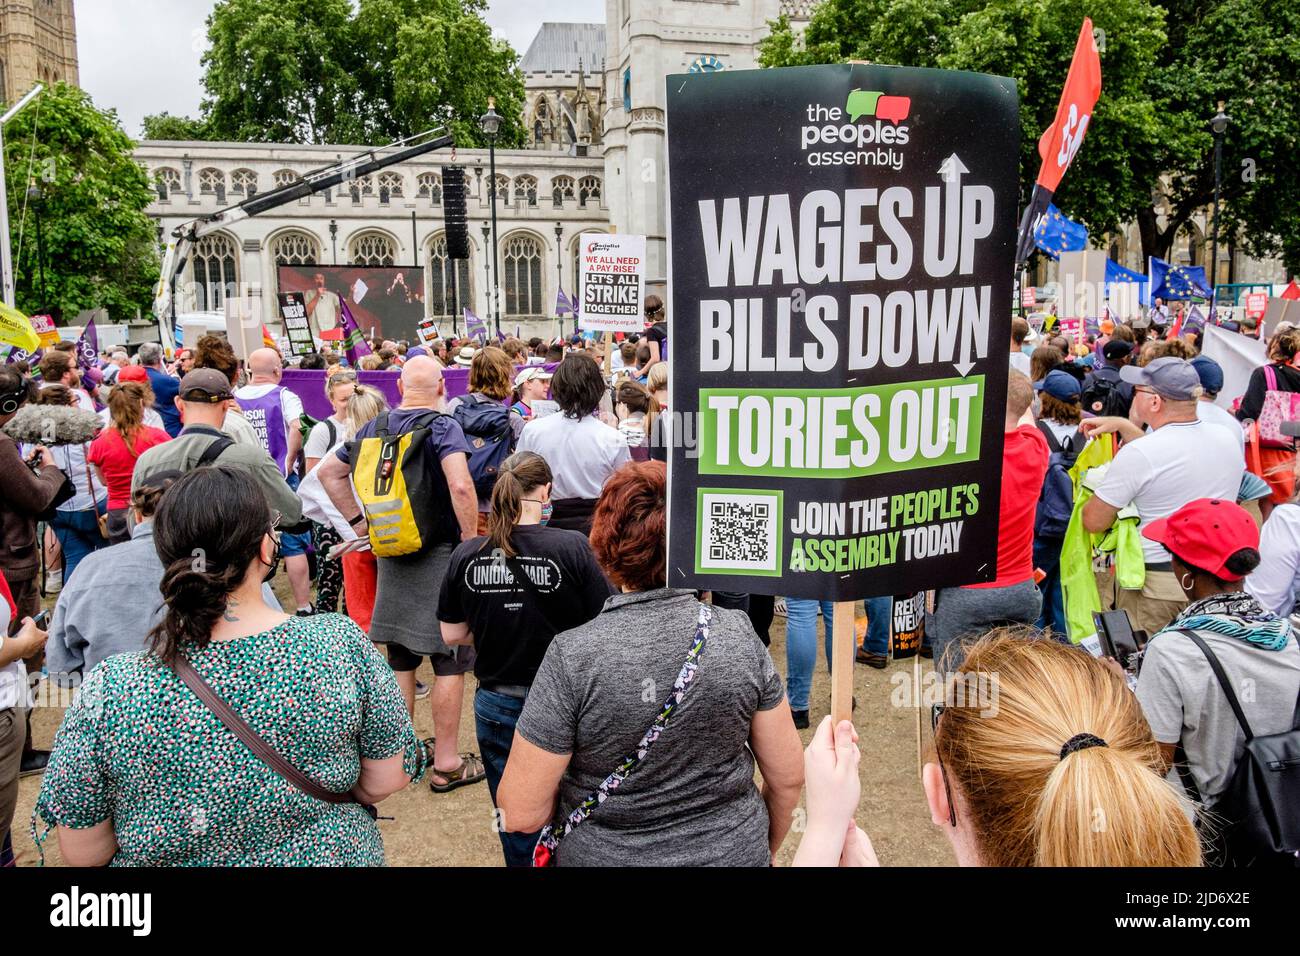 London UK, 18th June 2022. Thousands of trade union members march on the We Demand Better protest organised by the TUC against the UK government. Placards call for a rise in workers' wages and reduction in household bills. Stock Photo